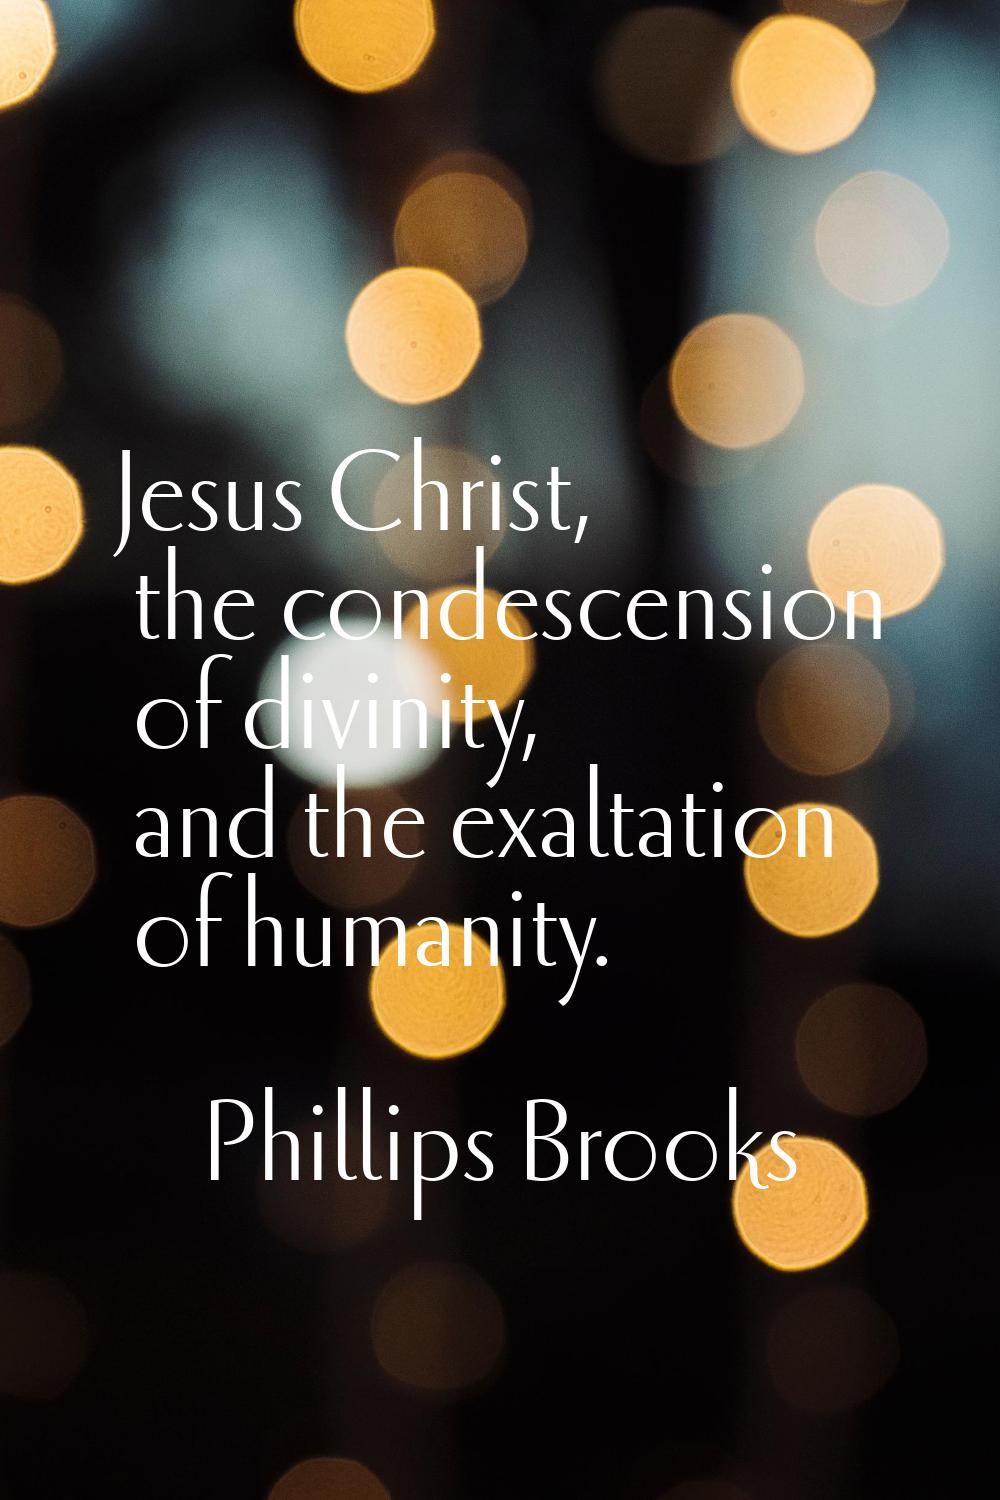 Jesus Christ, the condescension of divinity, and the exaltation of humanity.